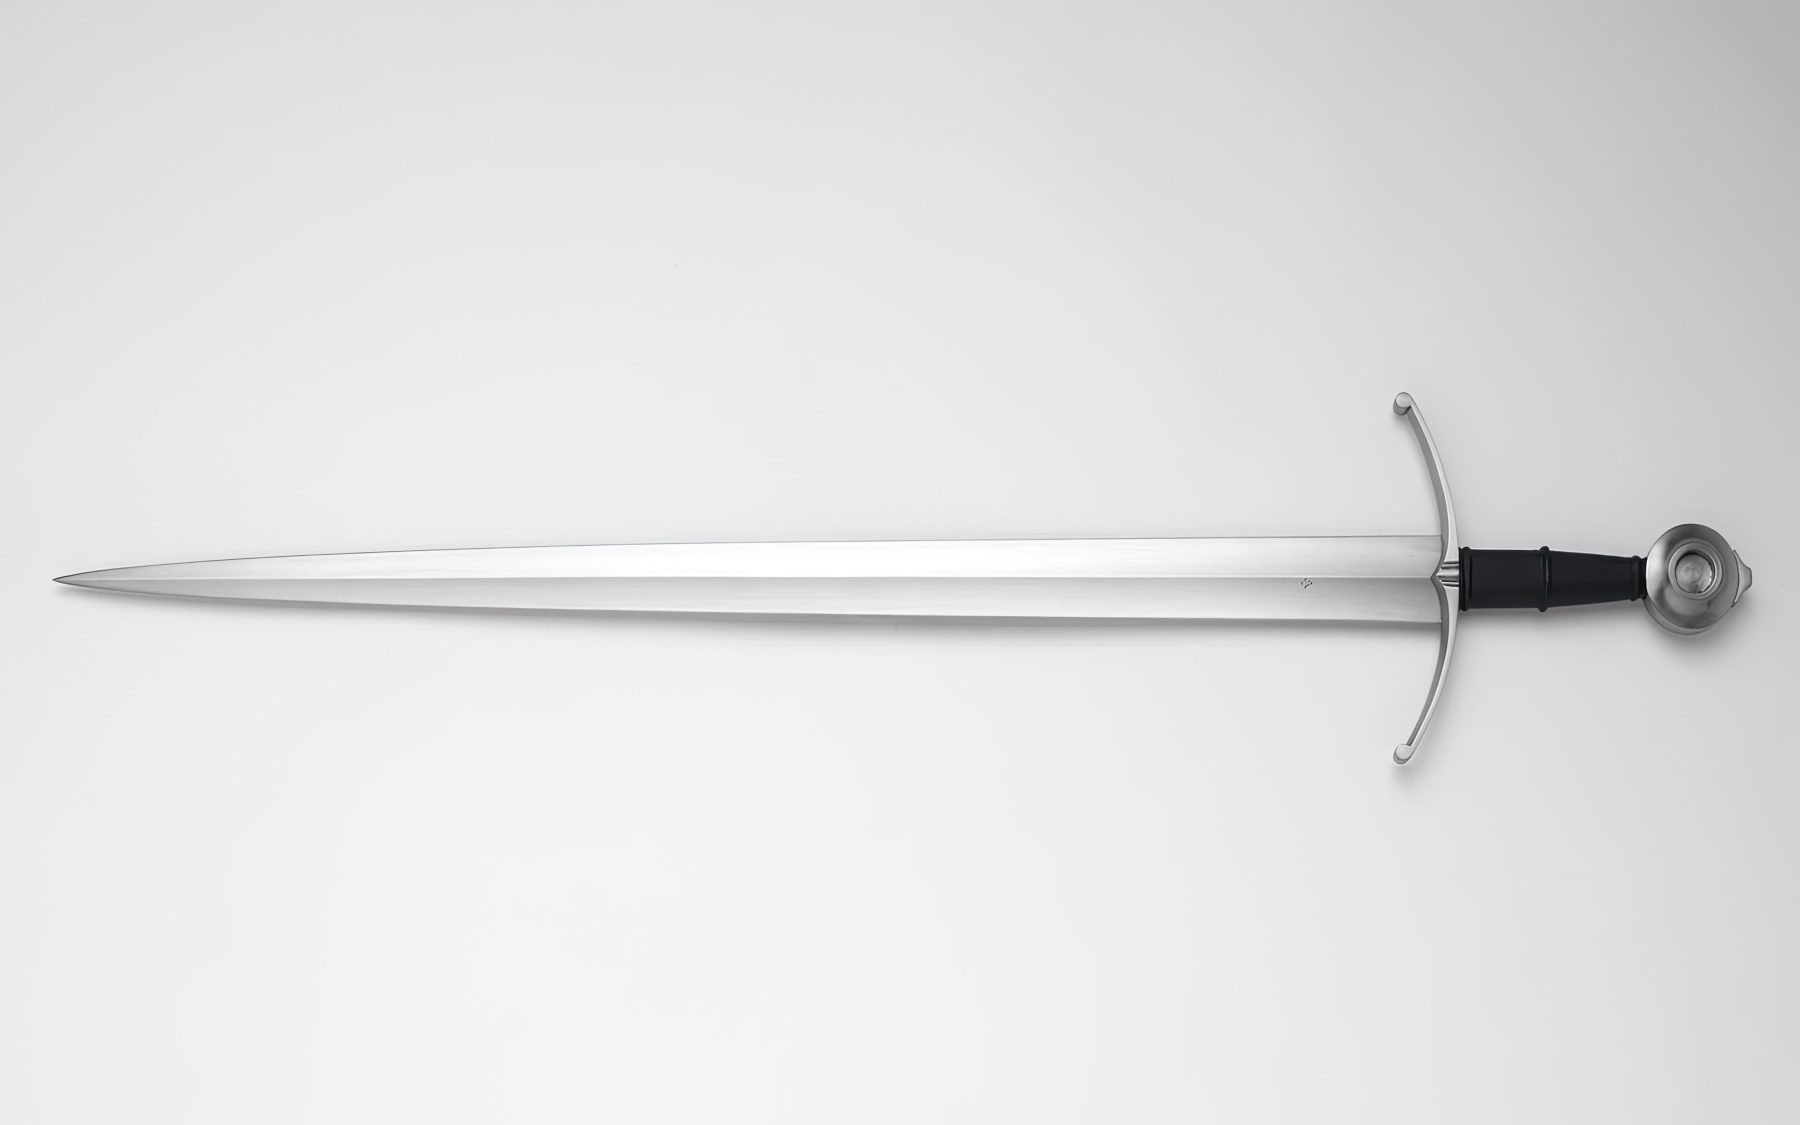 Oakeshott Type XVIII: The Quintessential Sword of the Middle Ages